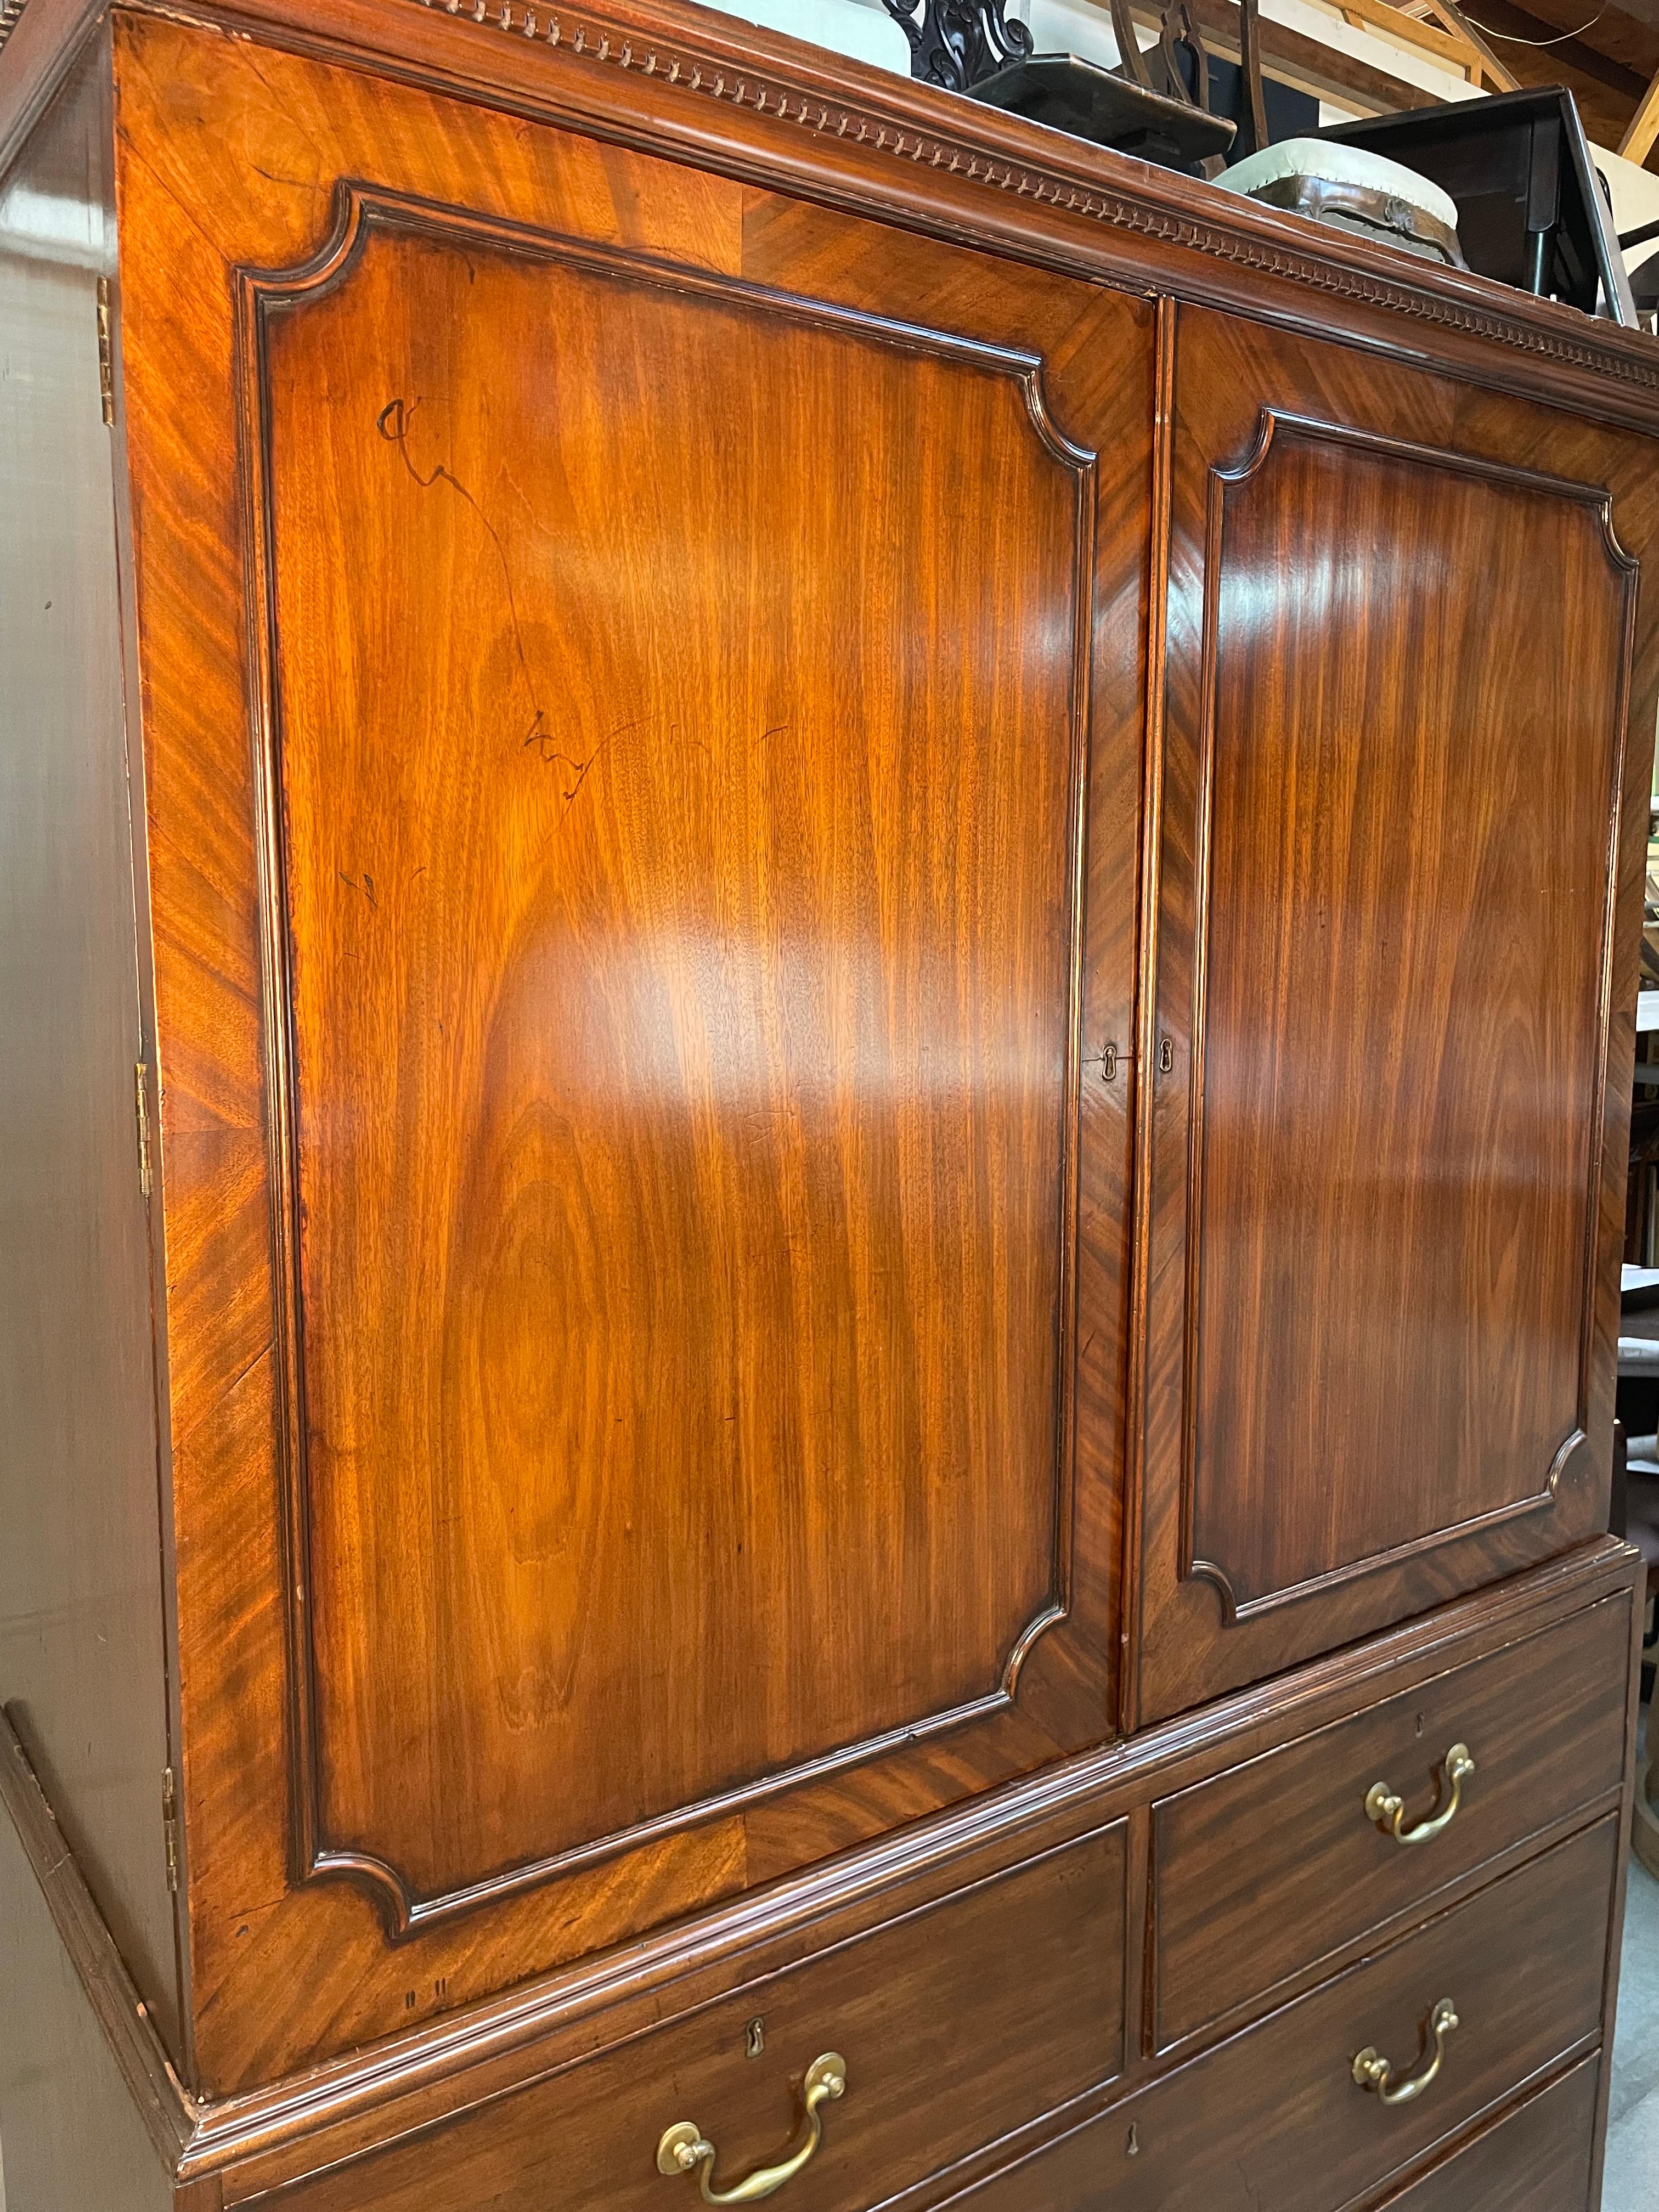 Made with strong mahogany wood in the Mid-18th century in England, this linen cabinet is of the most desirable. Extremely fine proportions of the linen press of the wardrobe, which would have been expected from any piece during this period. The